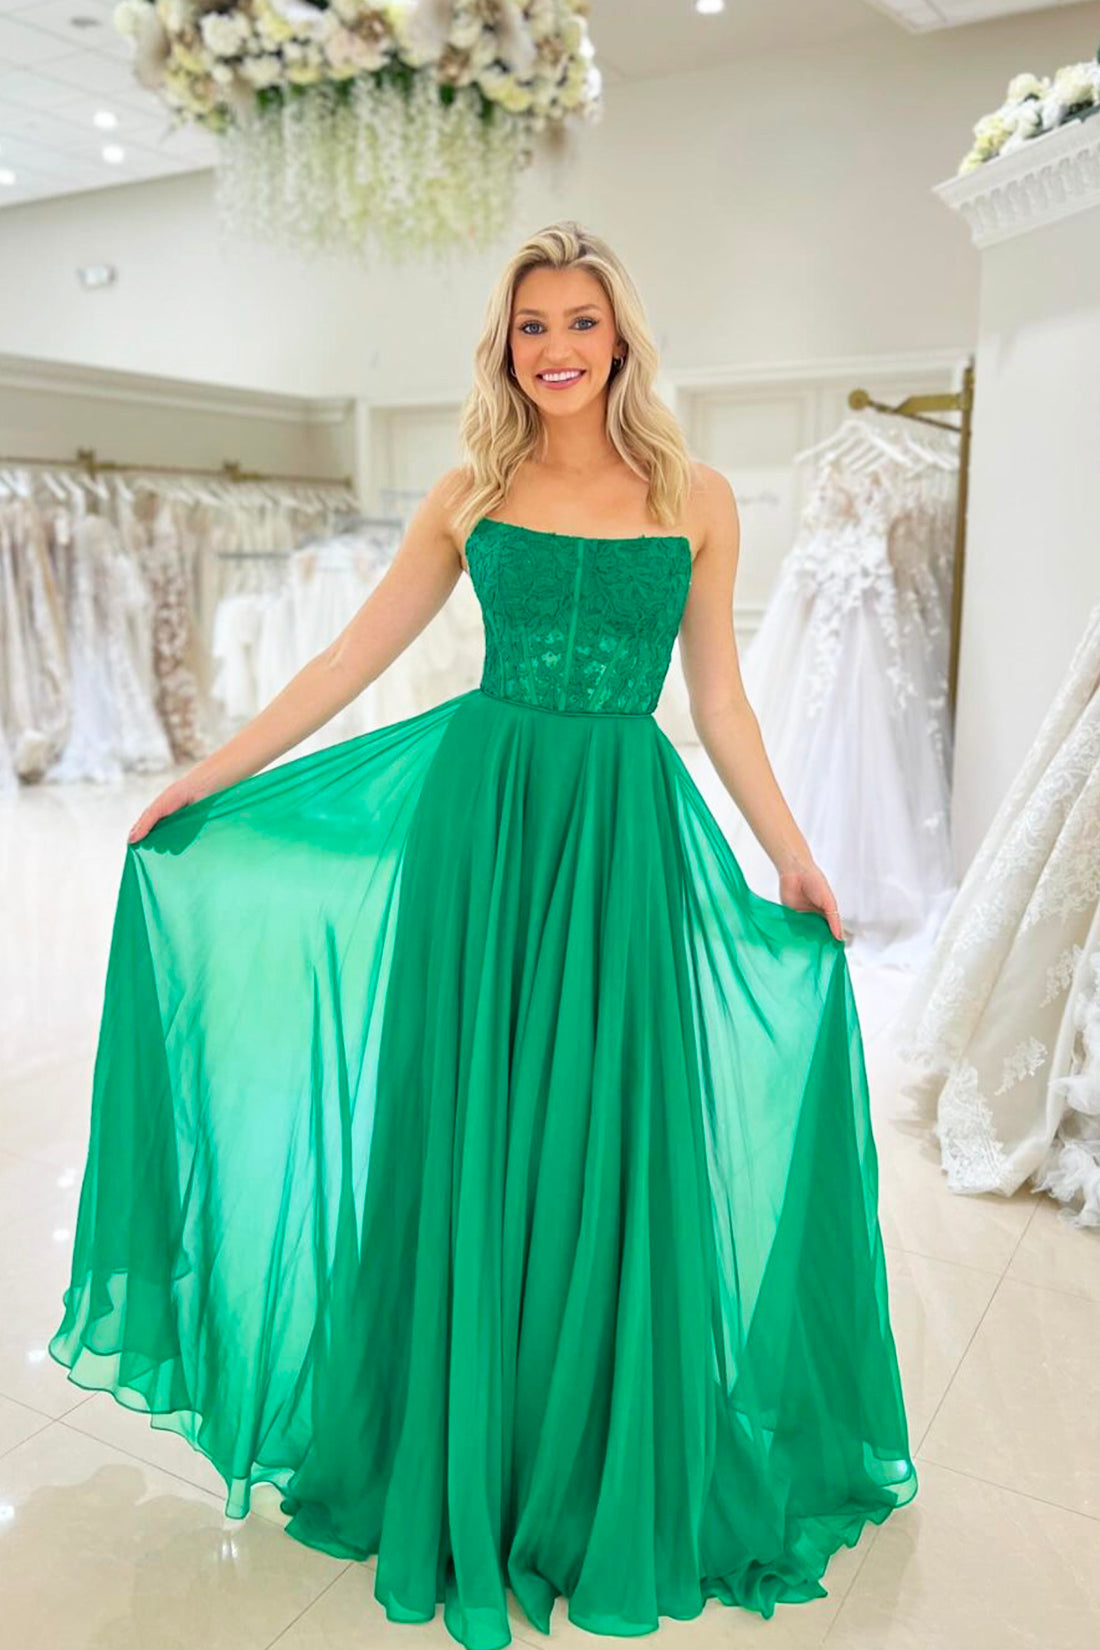 A-Line Green Chiffon Lace Long Prom Dress, Beautiful Strapless Floor Length Evening Party Dress